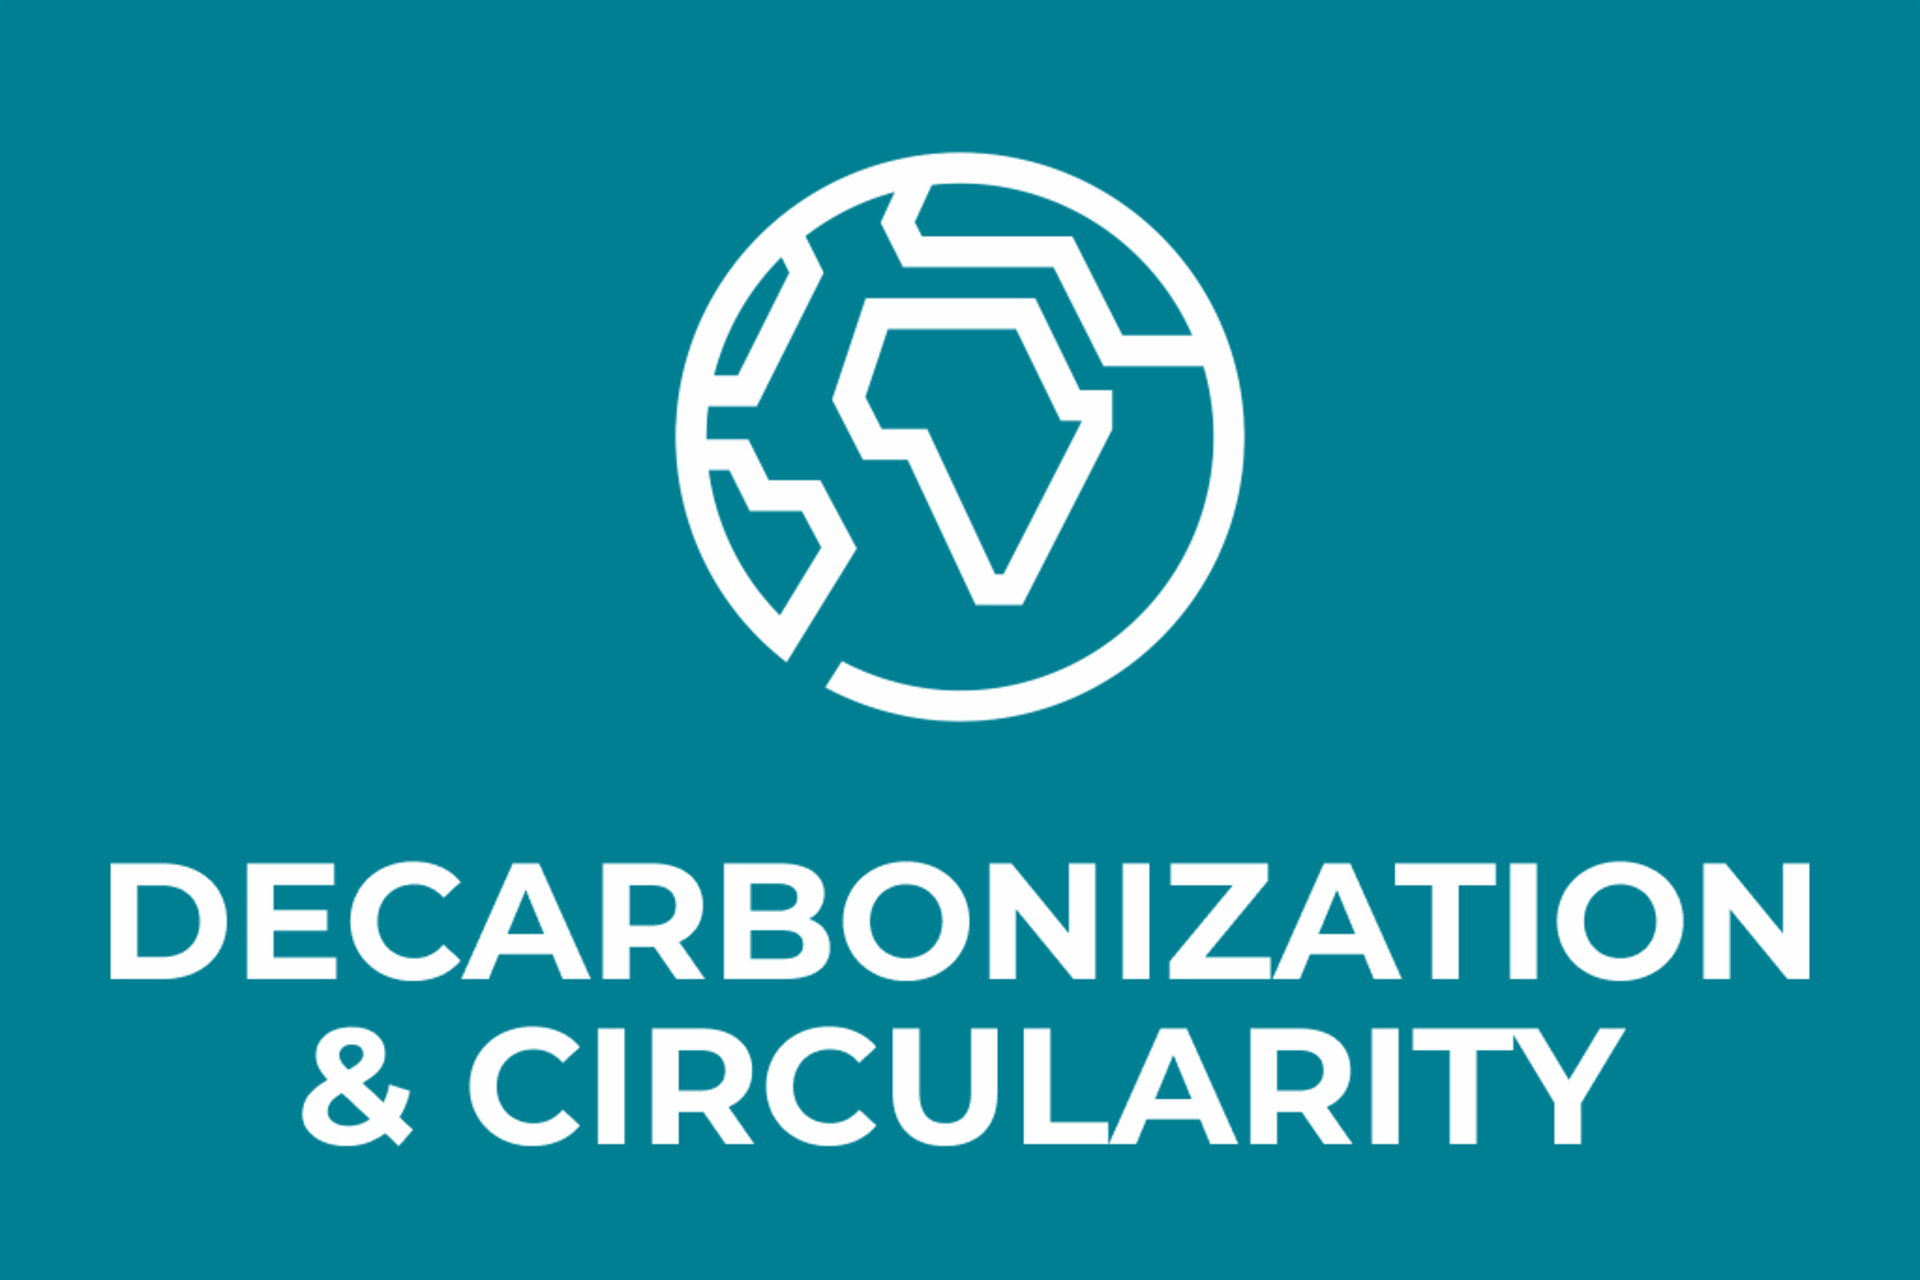 traton-sustainability-decarbonization-and-circularity